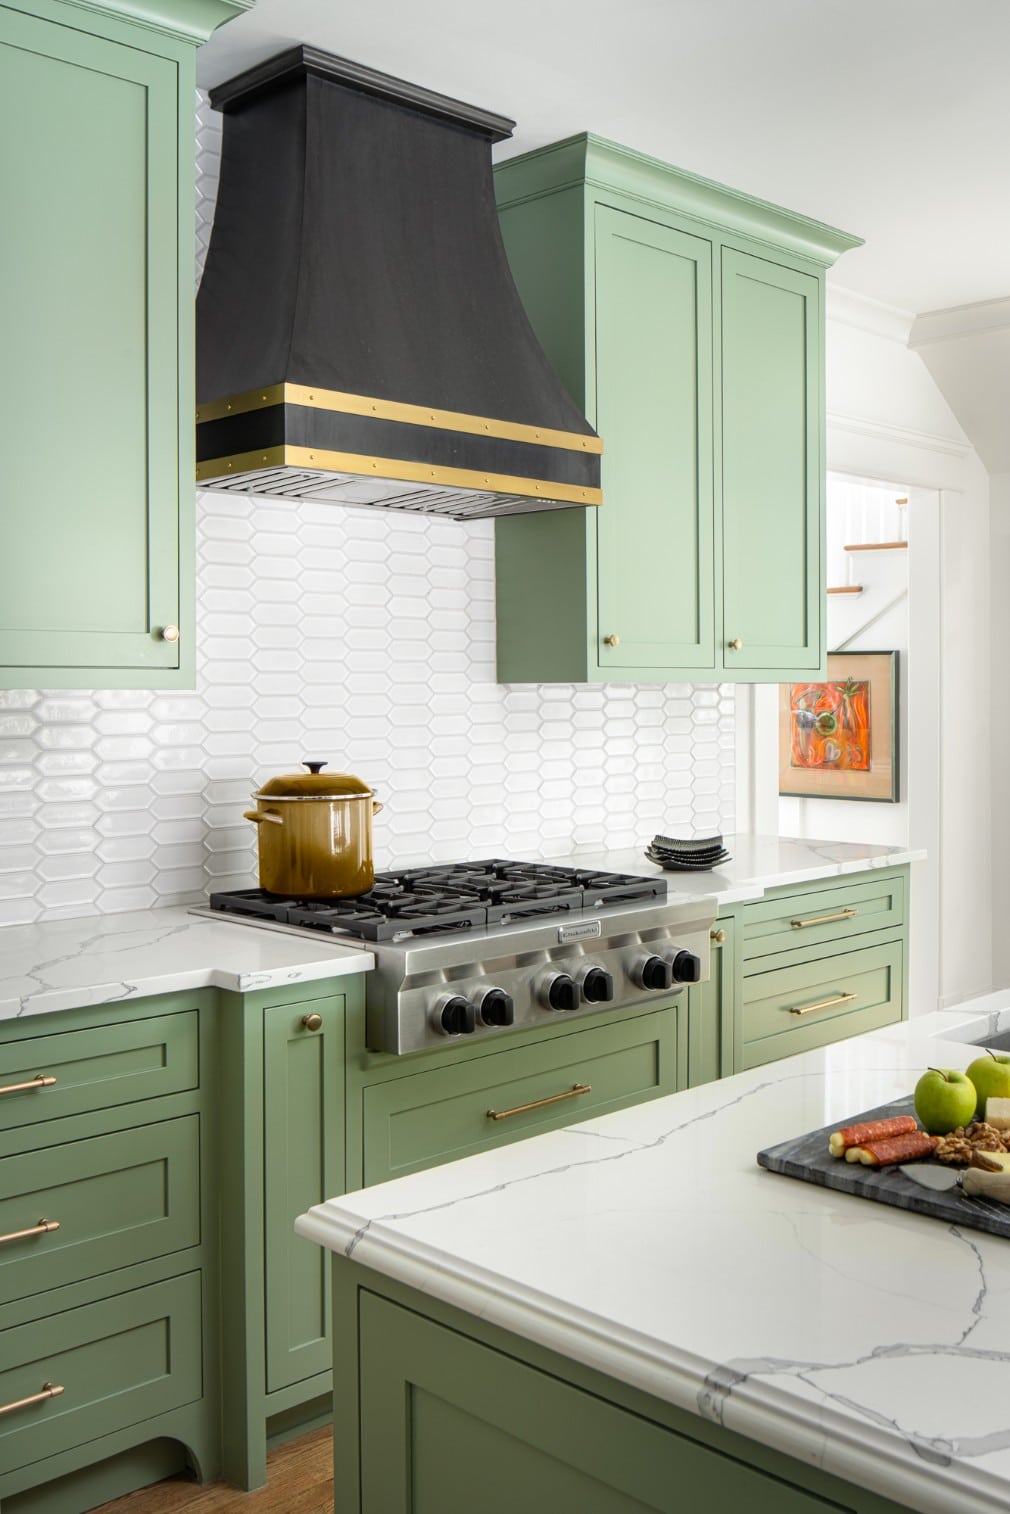 Transitional kitchen with green cabinetry, island, and black and brass range hood.